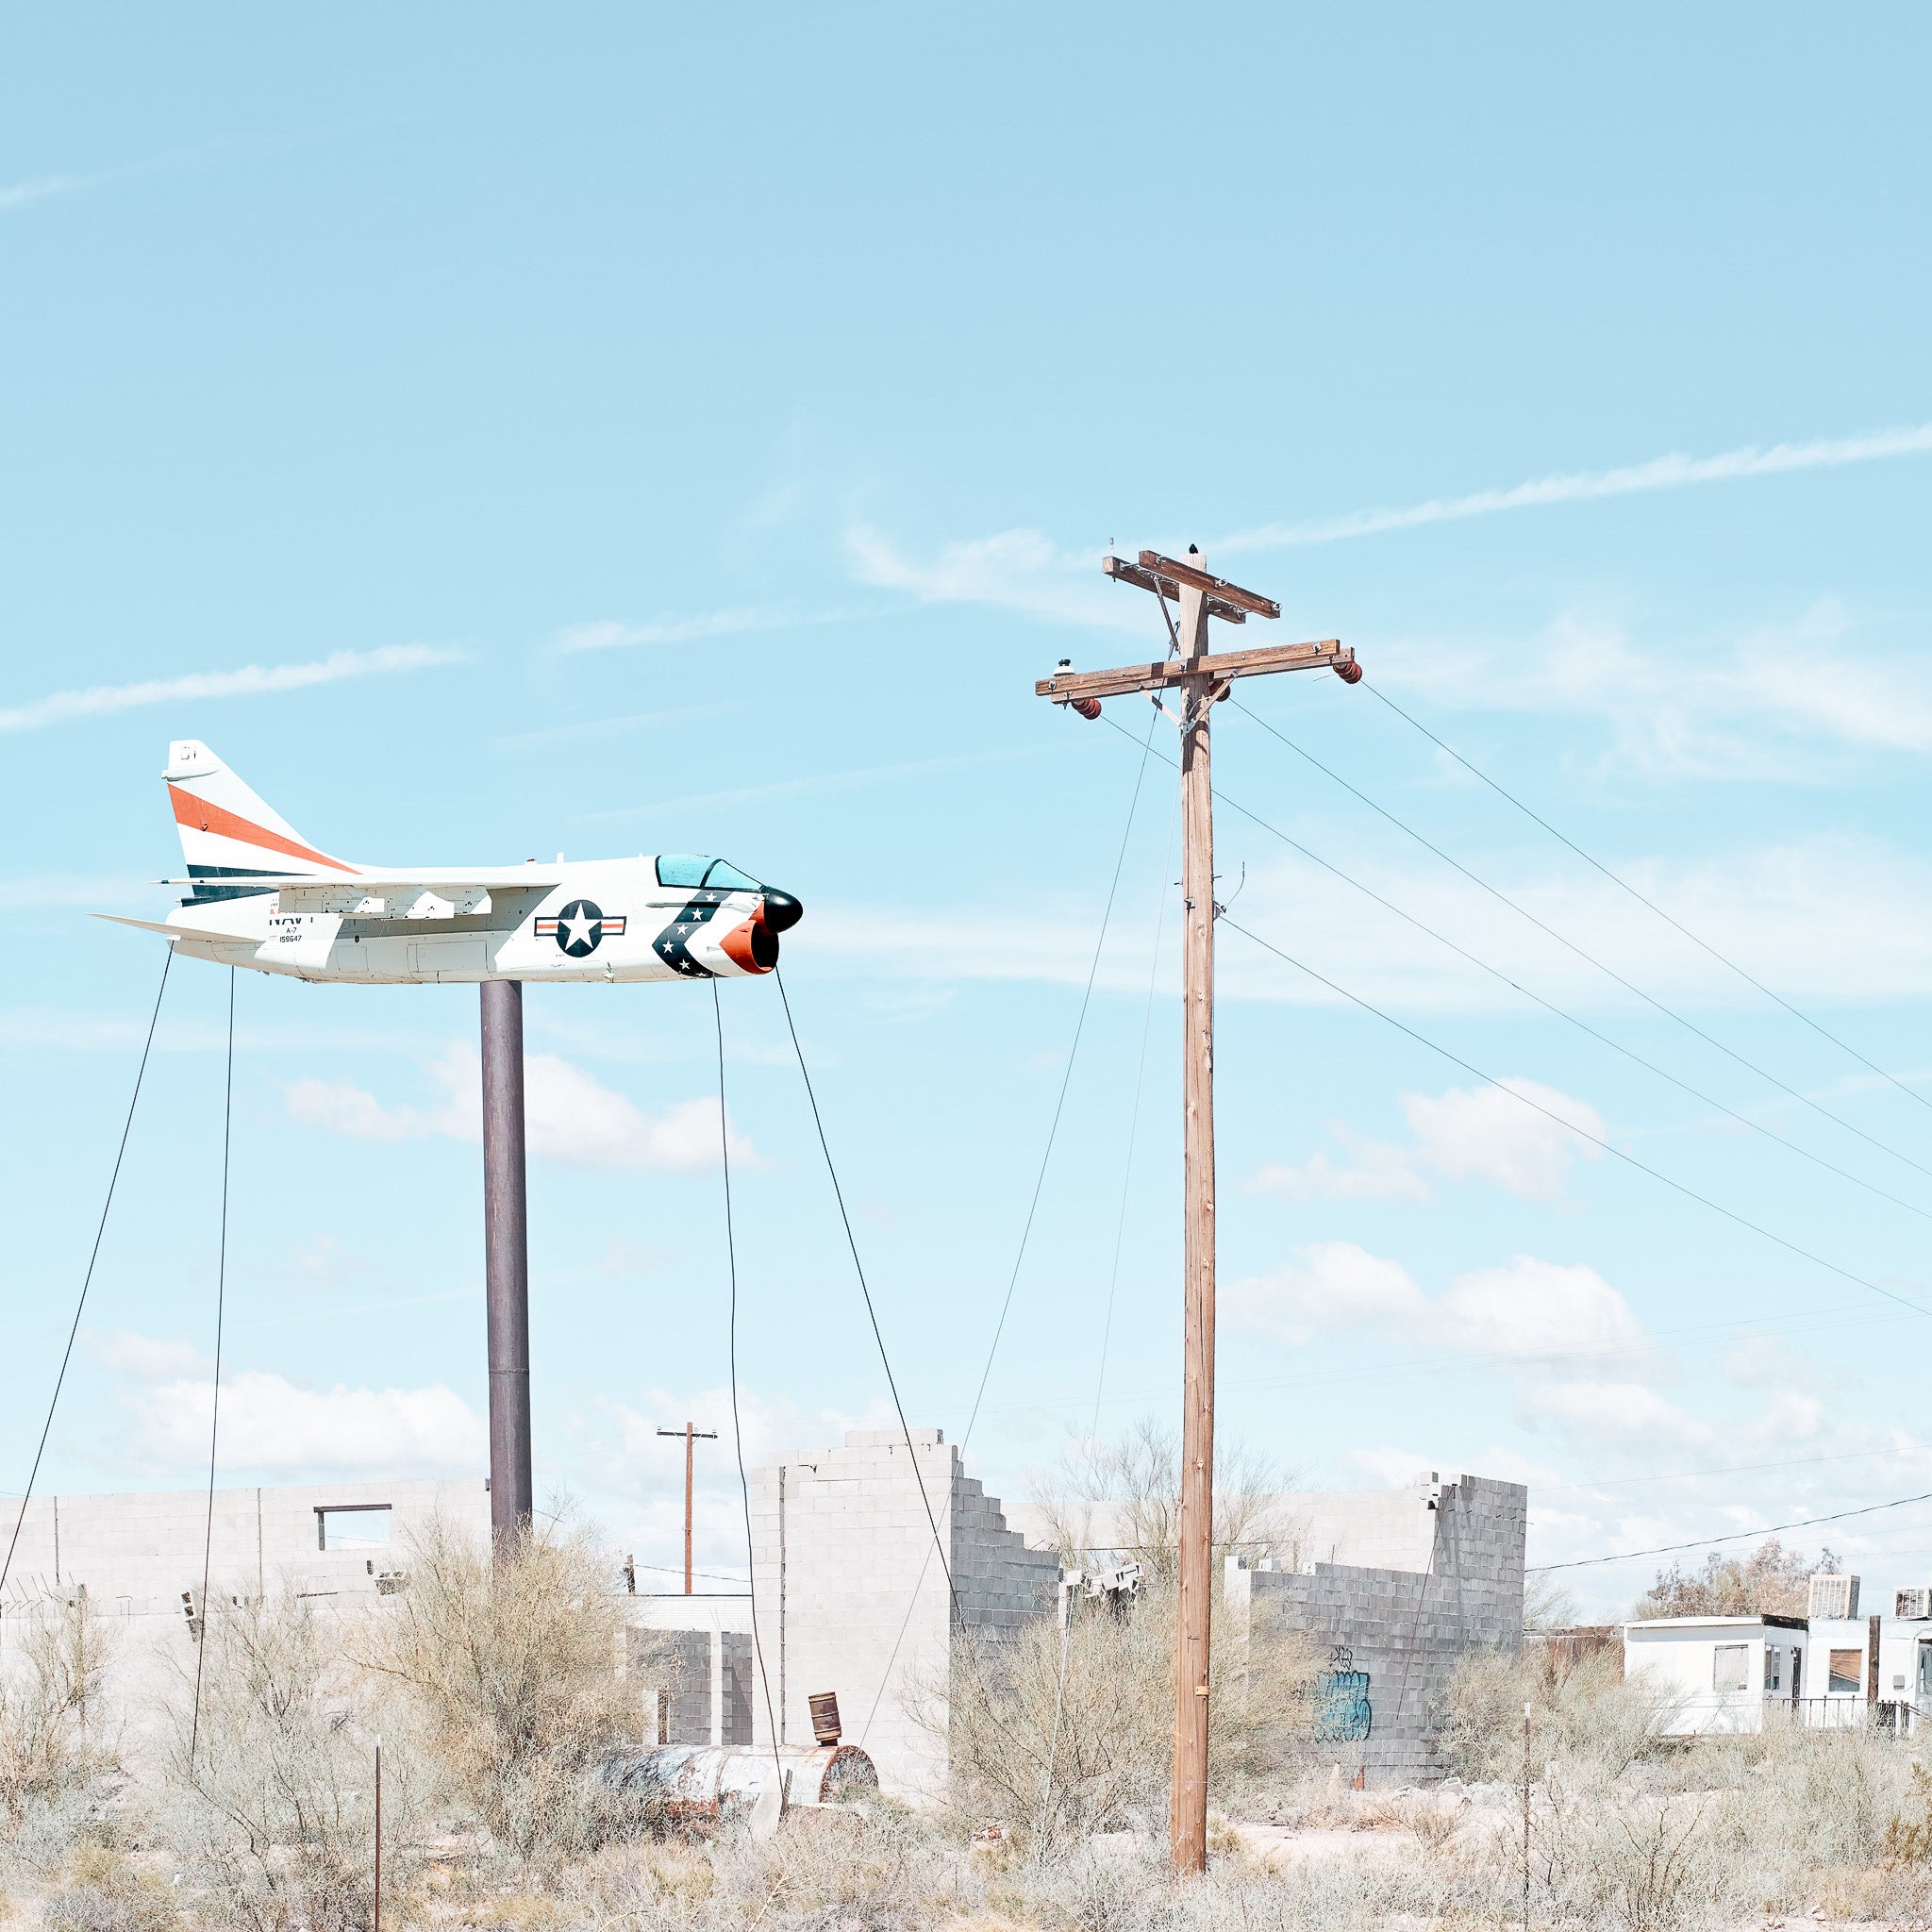 photograph taken in America of a fighter jet on a pole in a dusty town.